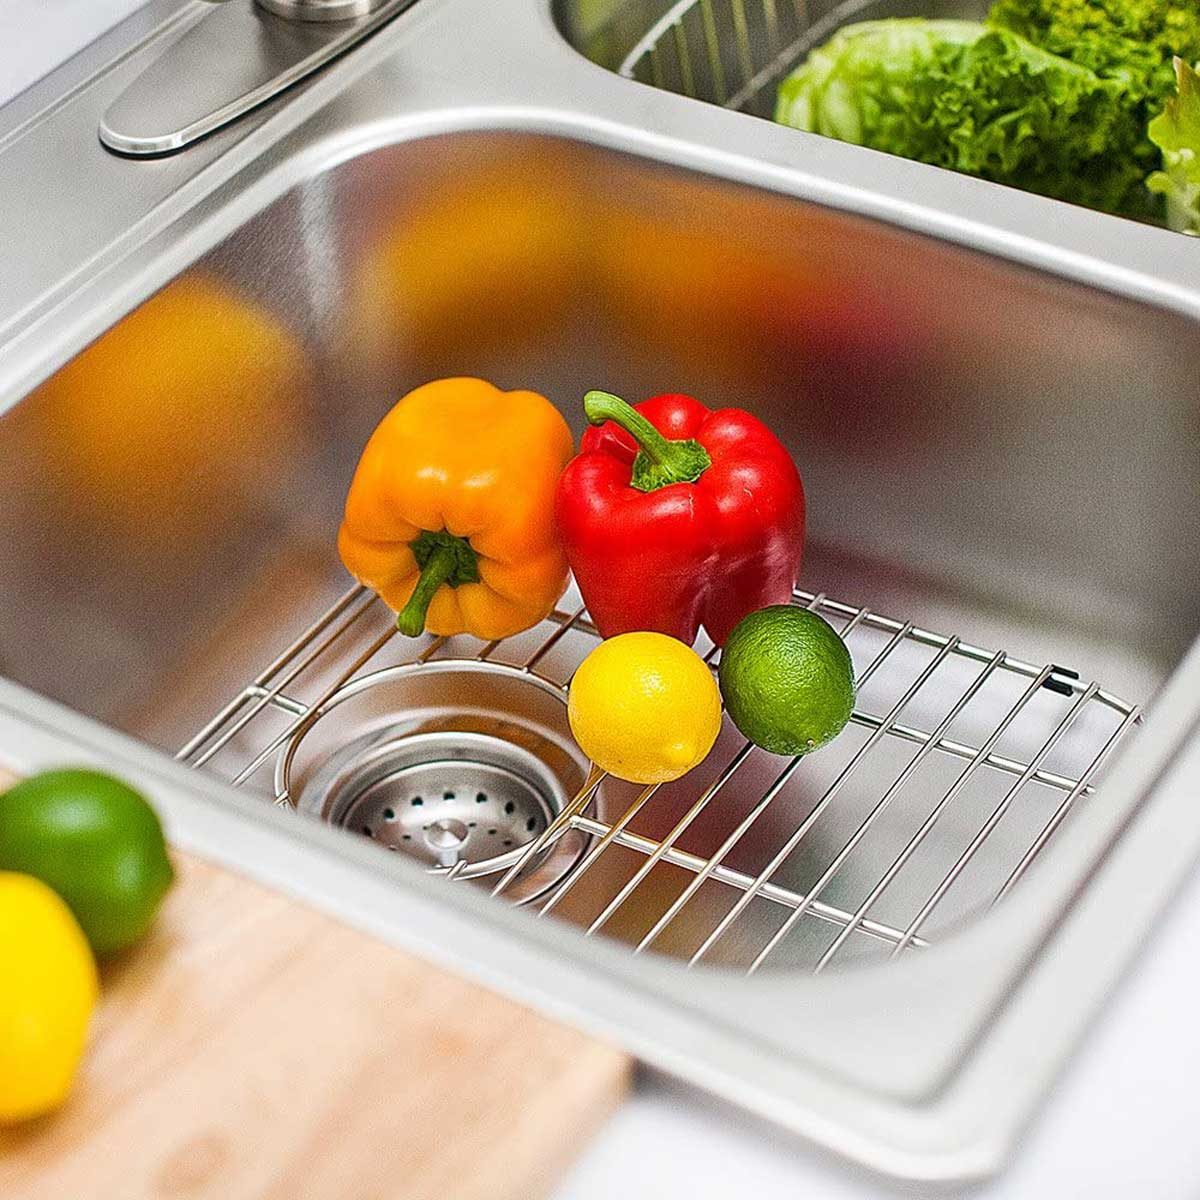 8 Best Sink Mats and Grids